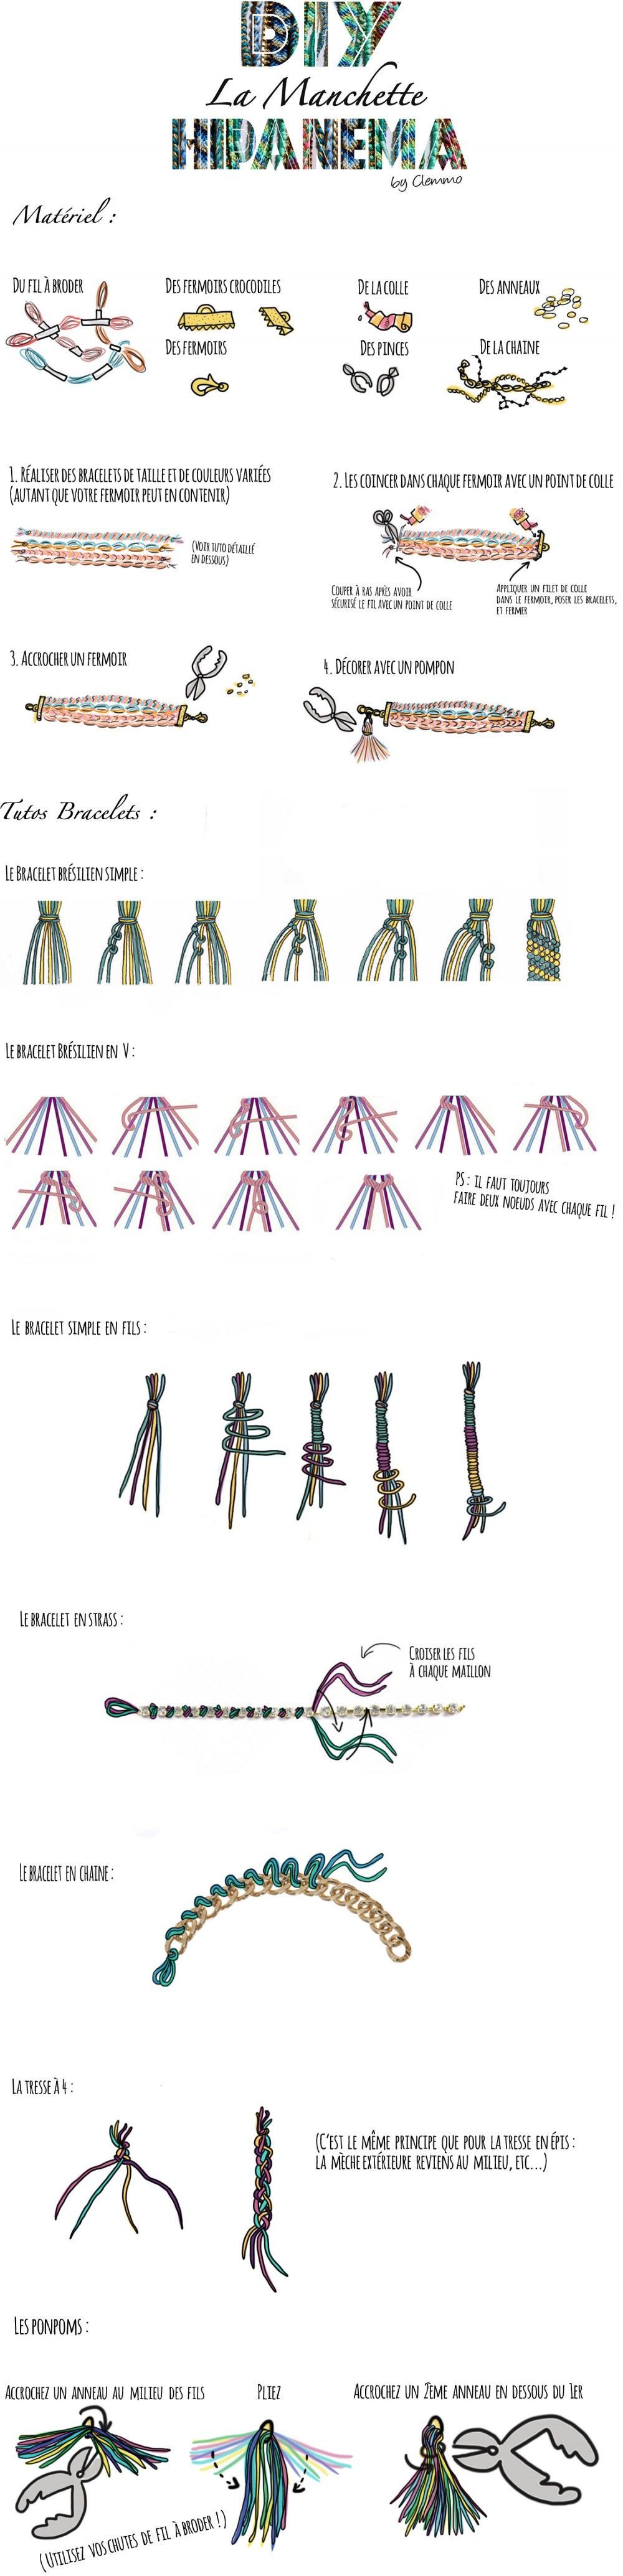 Simple tutorial in french for hipanema bracelets. Images are easy to follow! #diy_bracelets_manchette